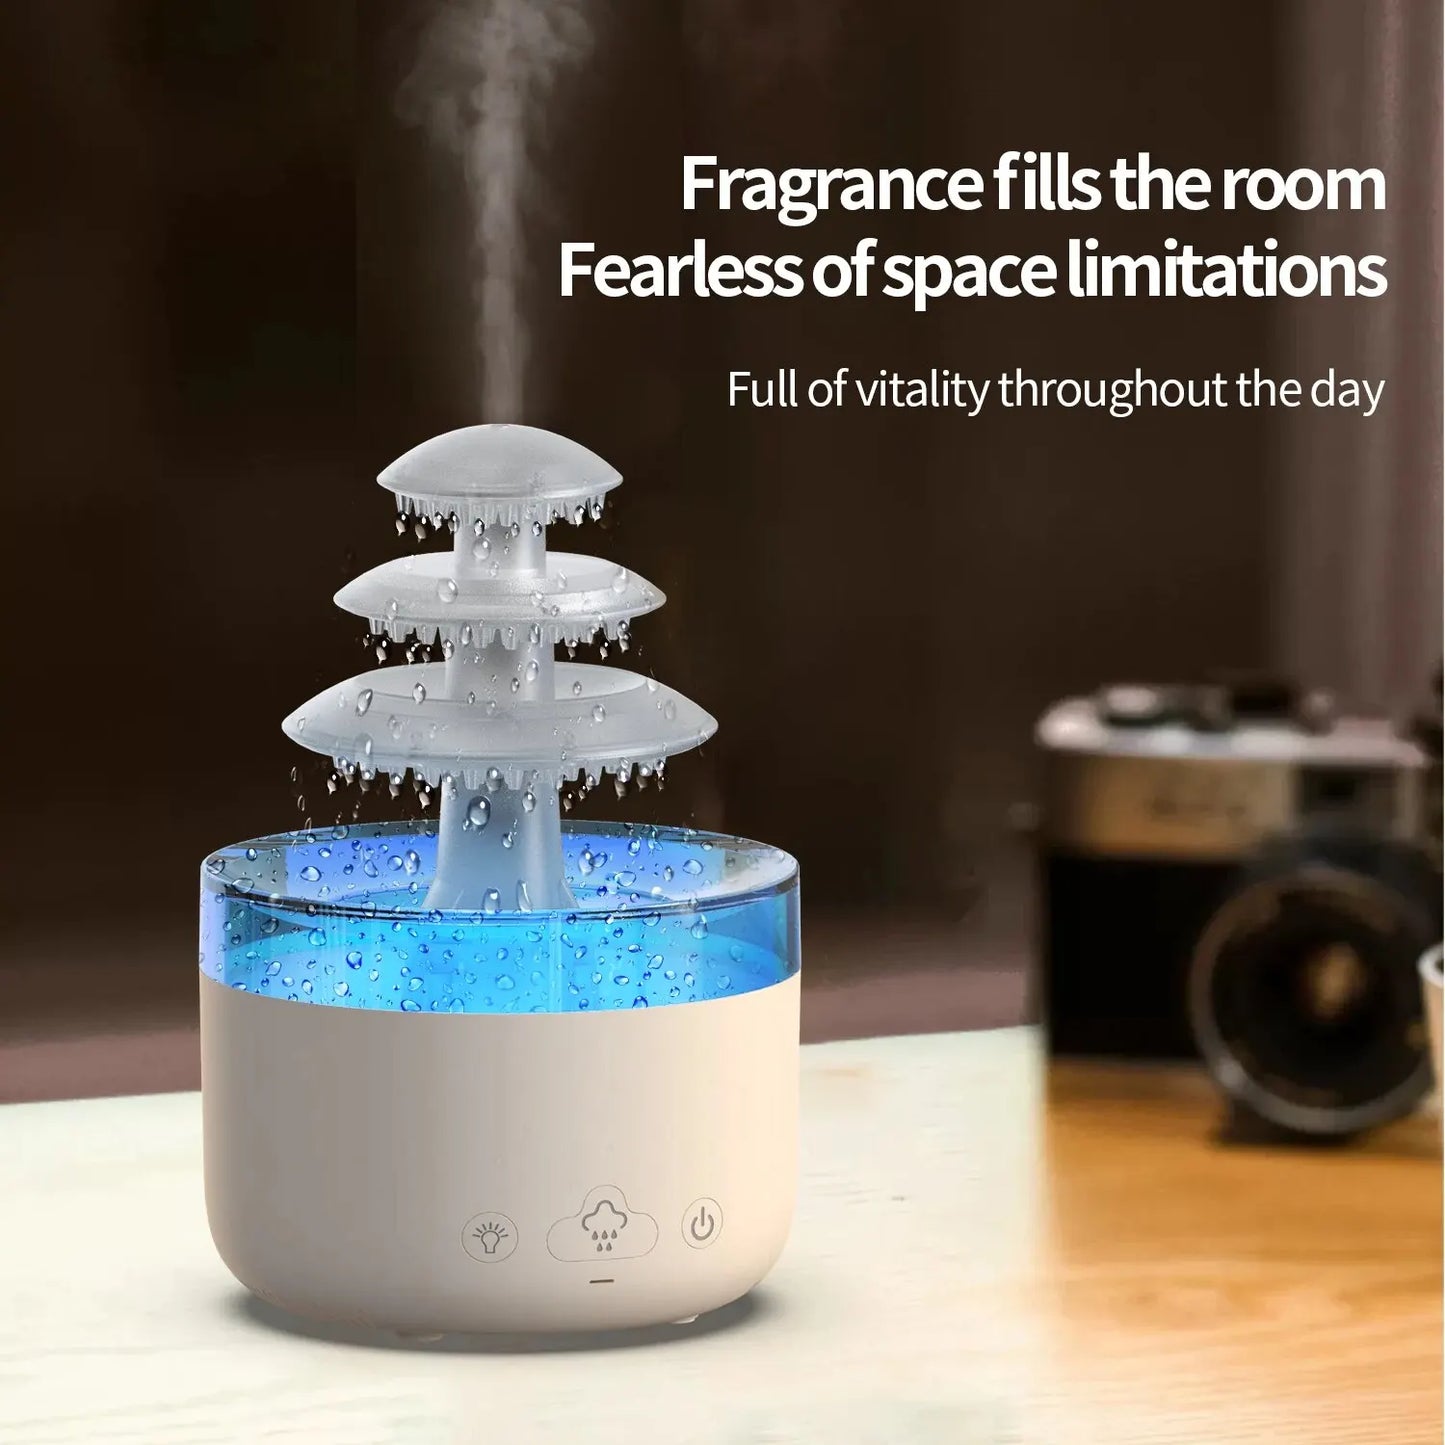 Cloud Rain Air Humidifier White Noise Essential Oil Aromatherapy Diffuser
USB Mute Mist Air Humidifier With Colorful Light